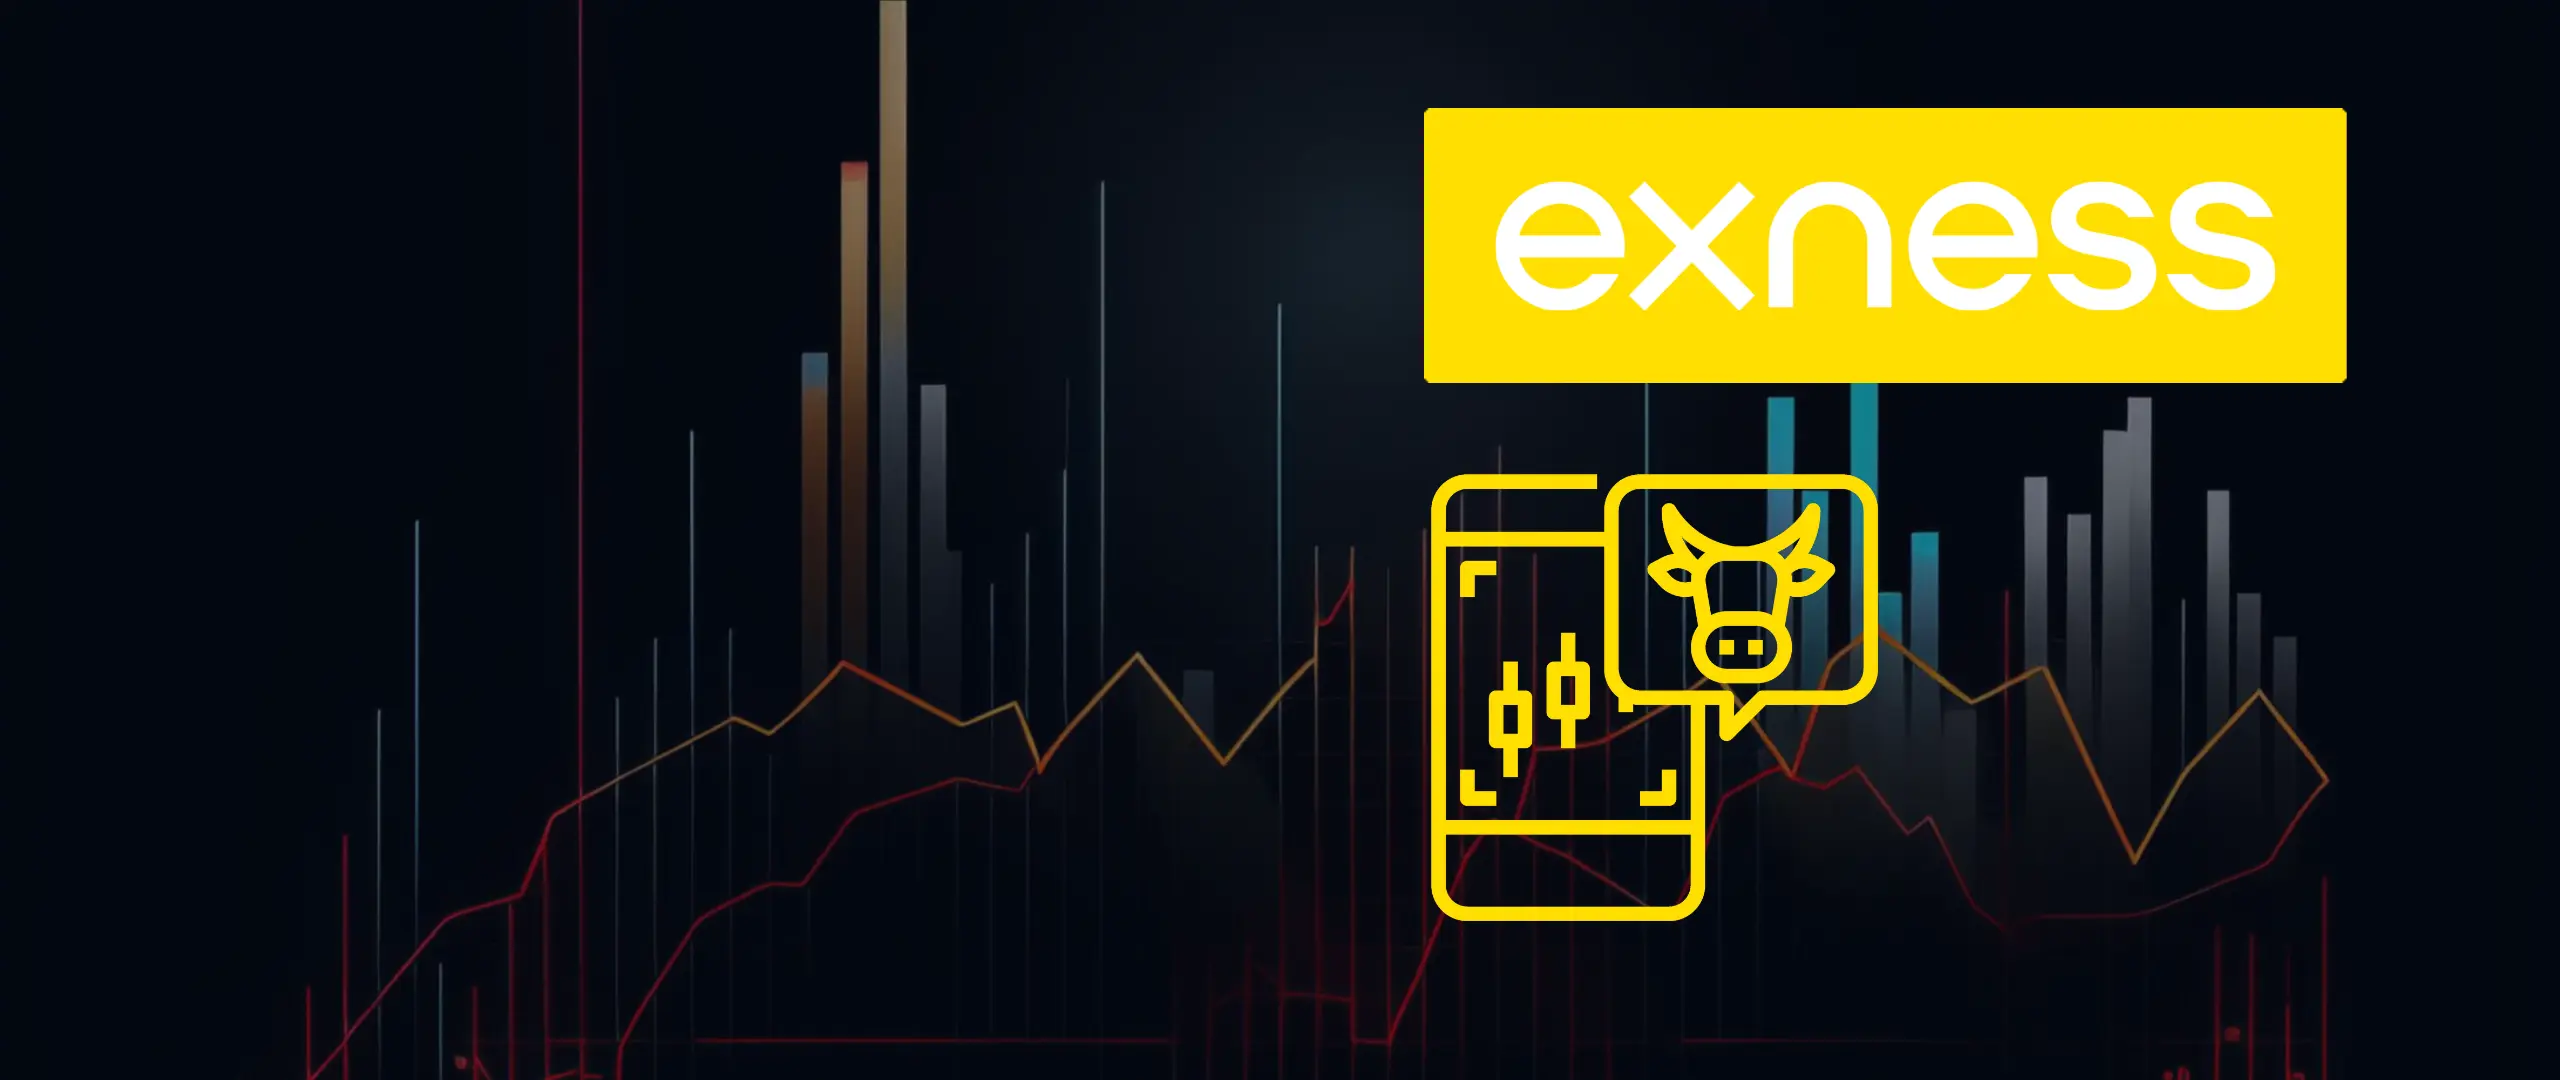 17 Tricks About Exness MT4 Trading Platform You Wish You Knew Before